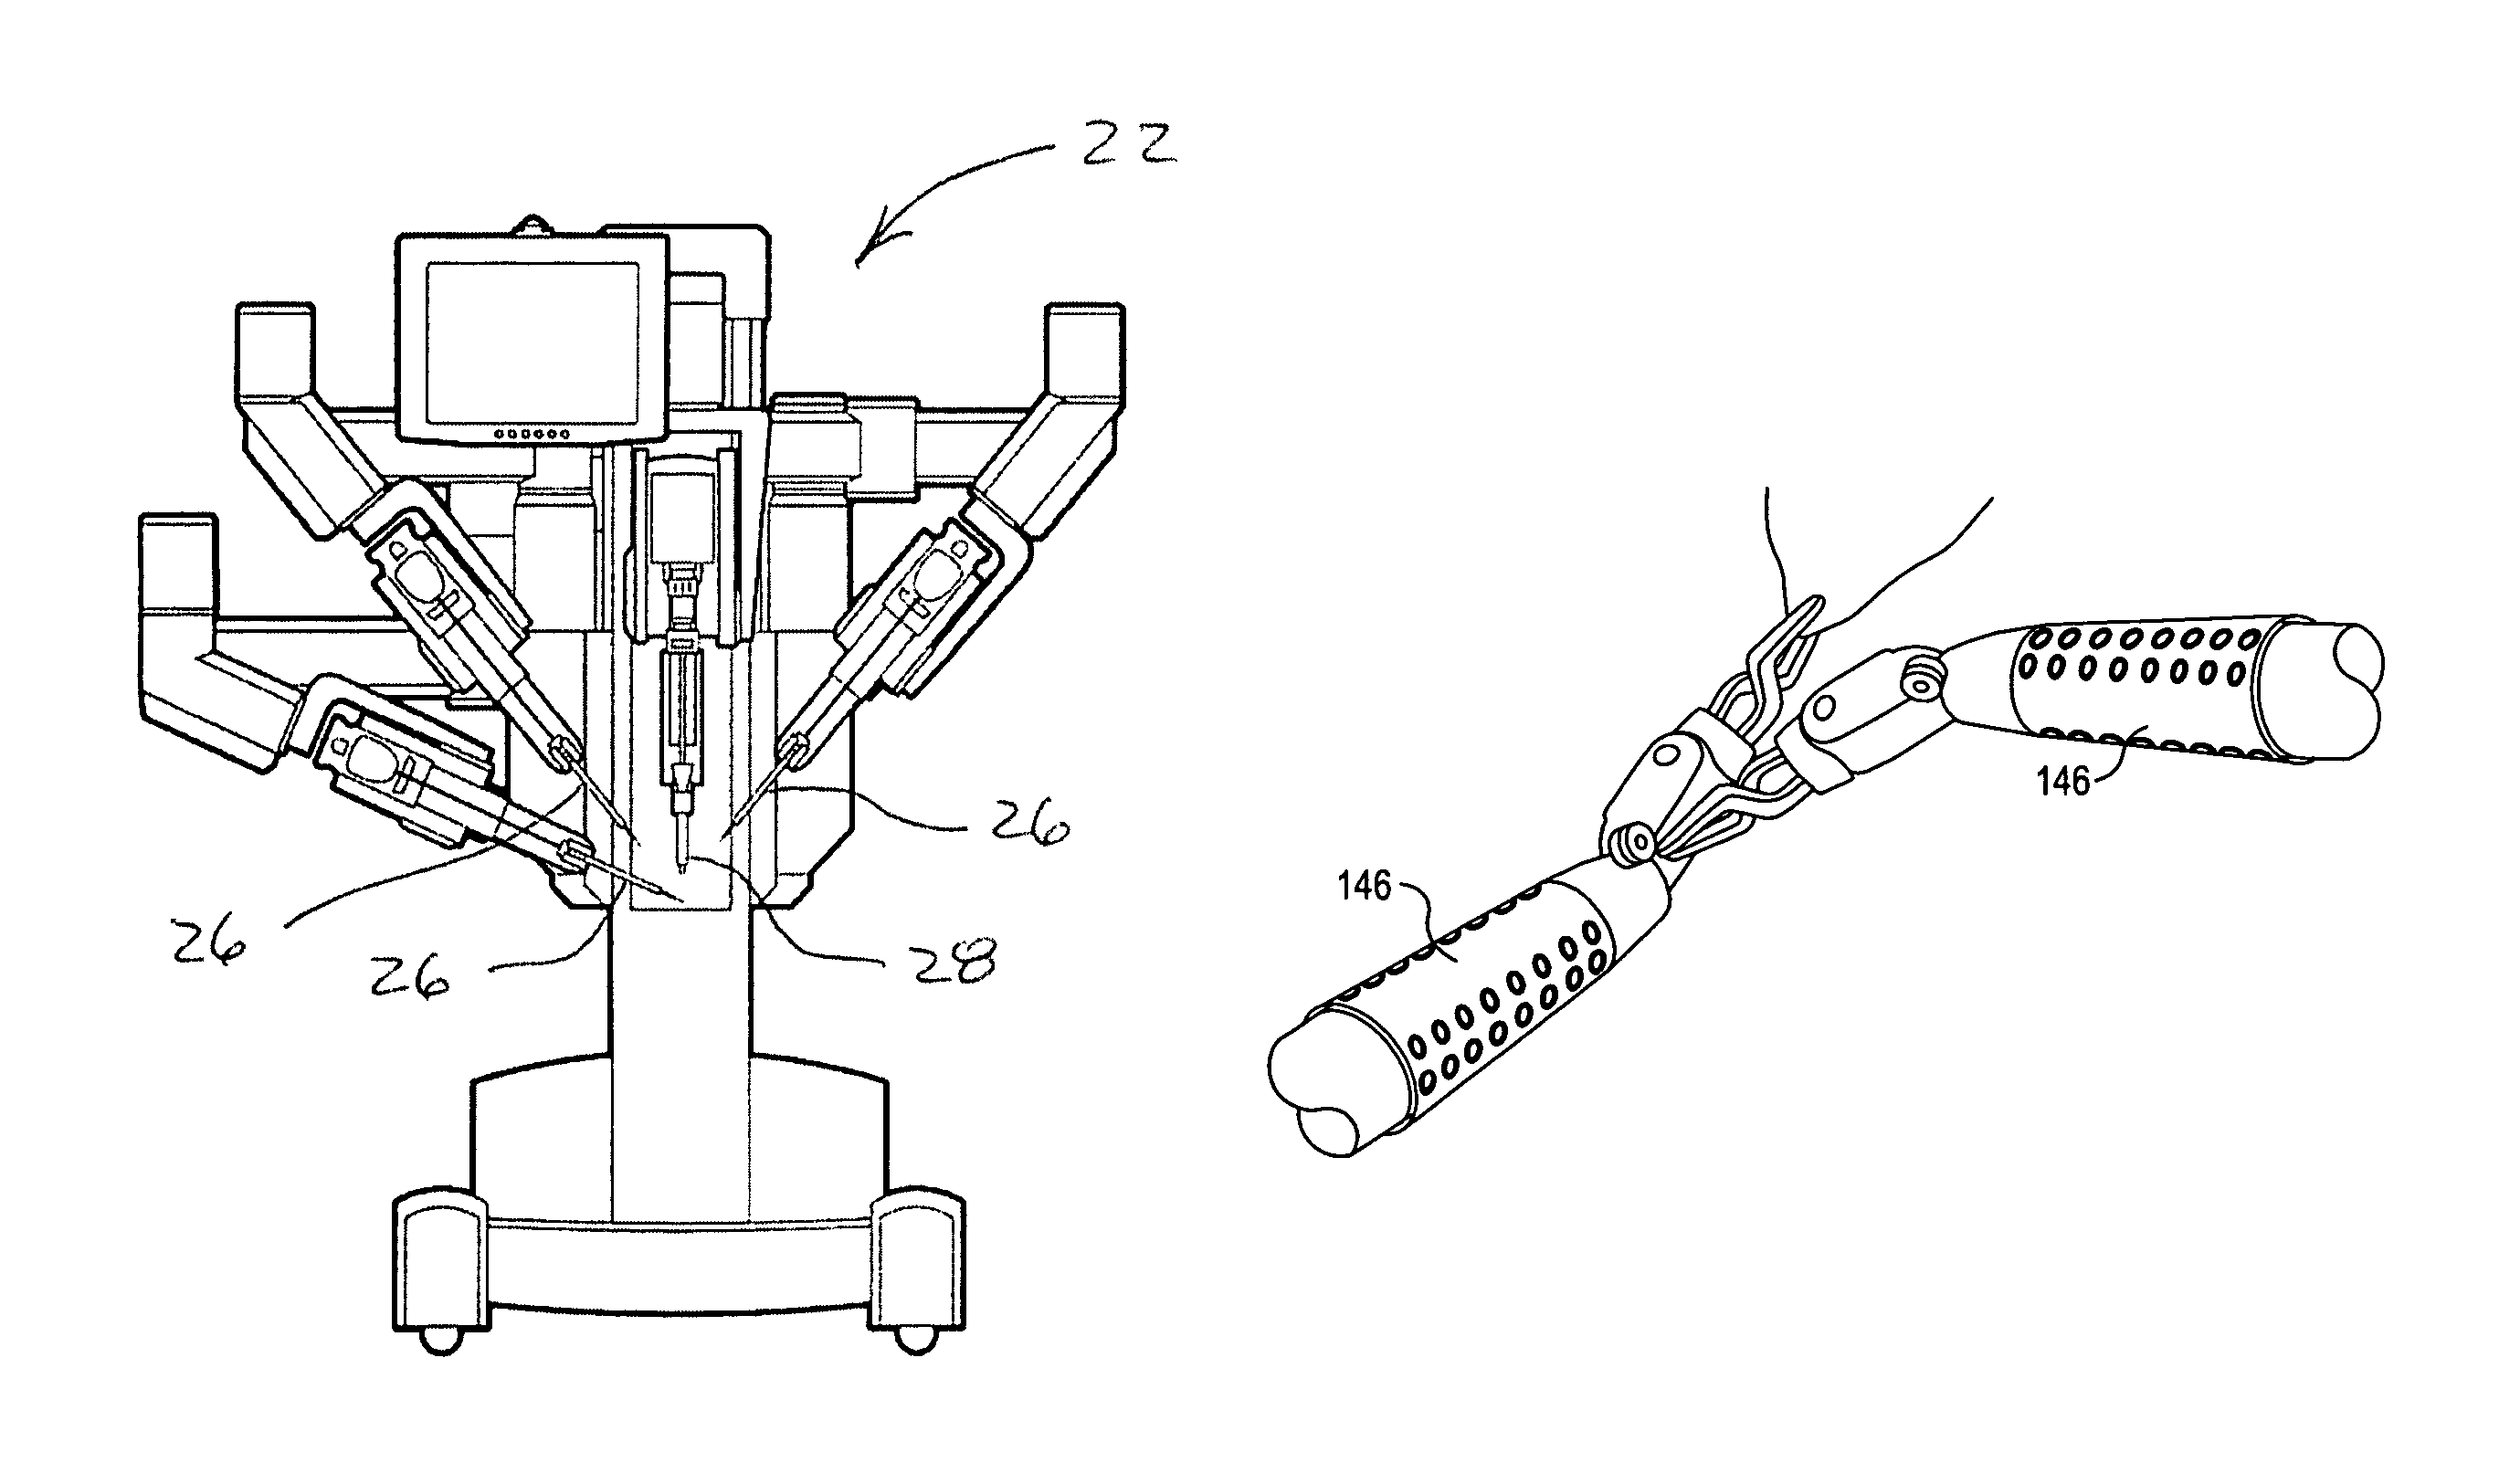 Fiducial marker design and detection for locating surgical instrument in images